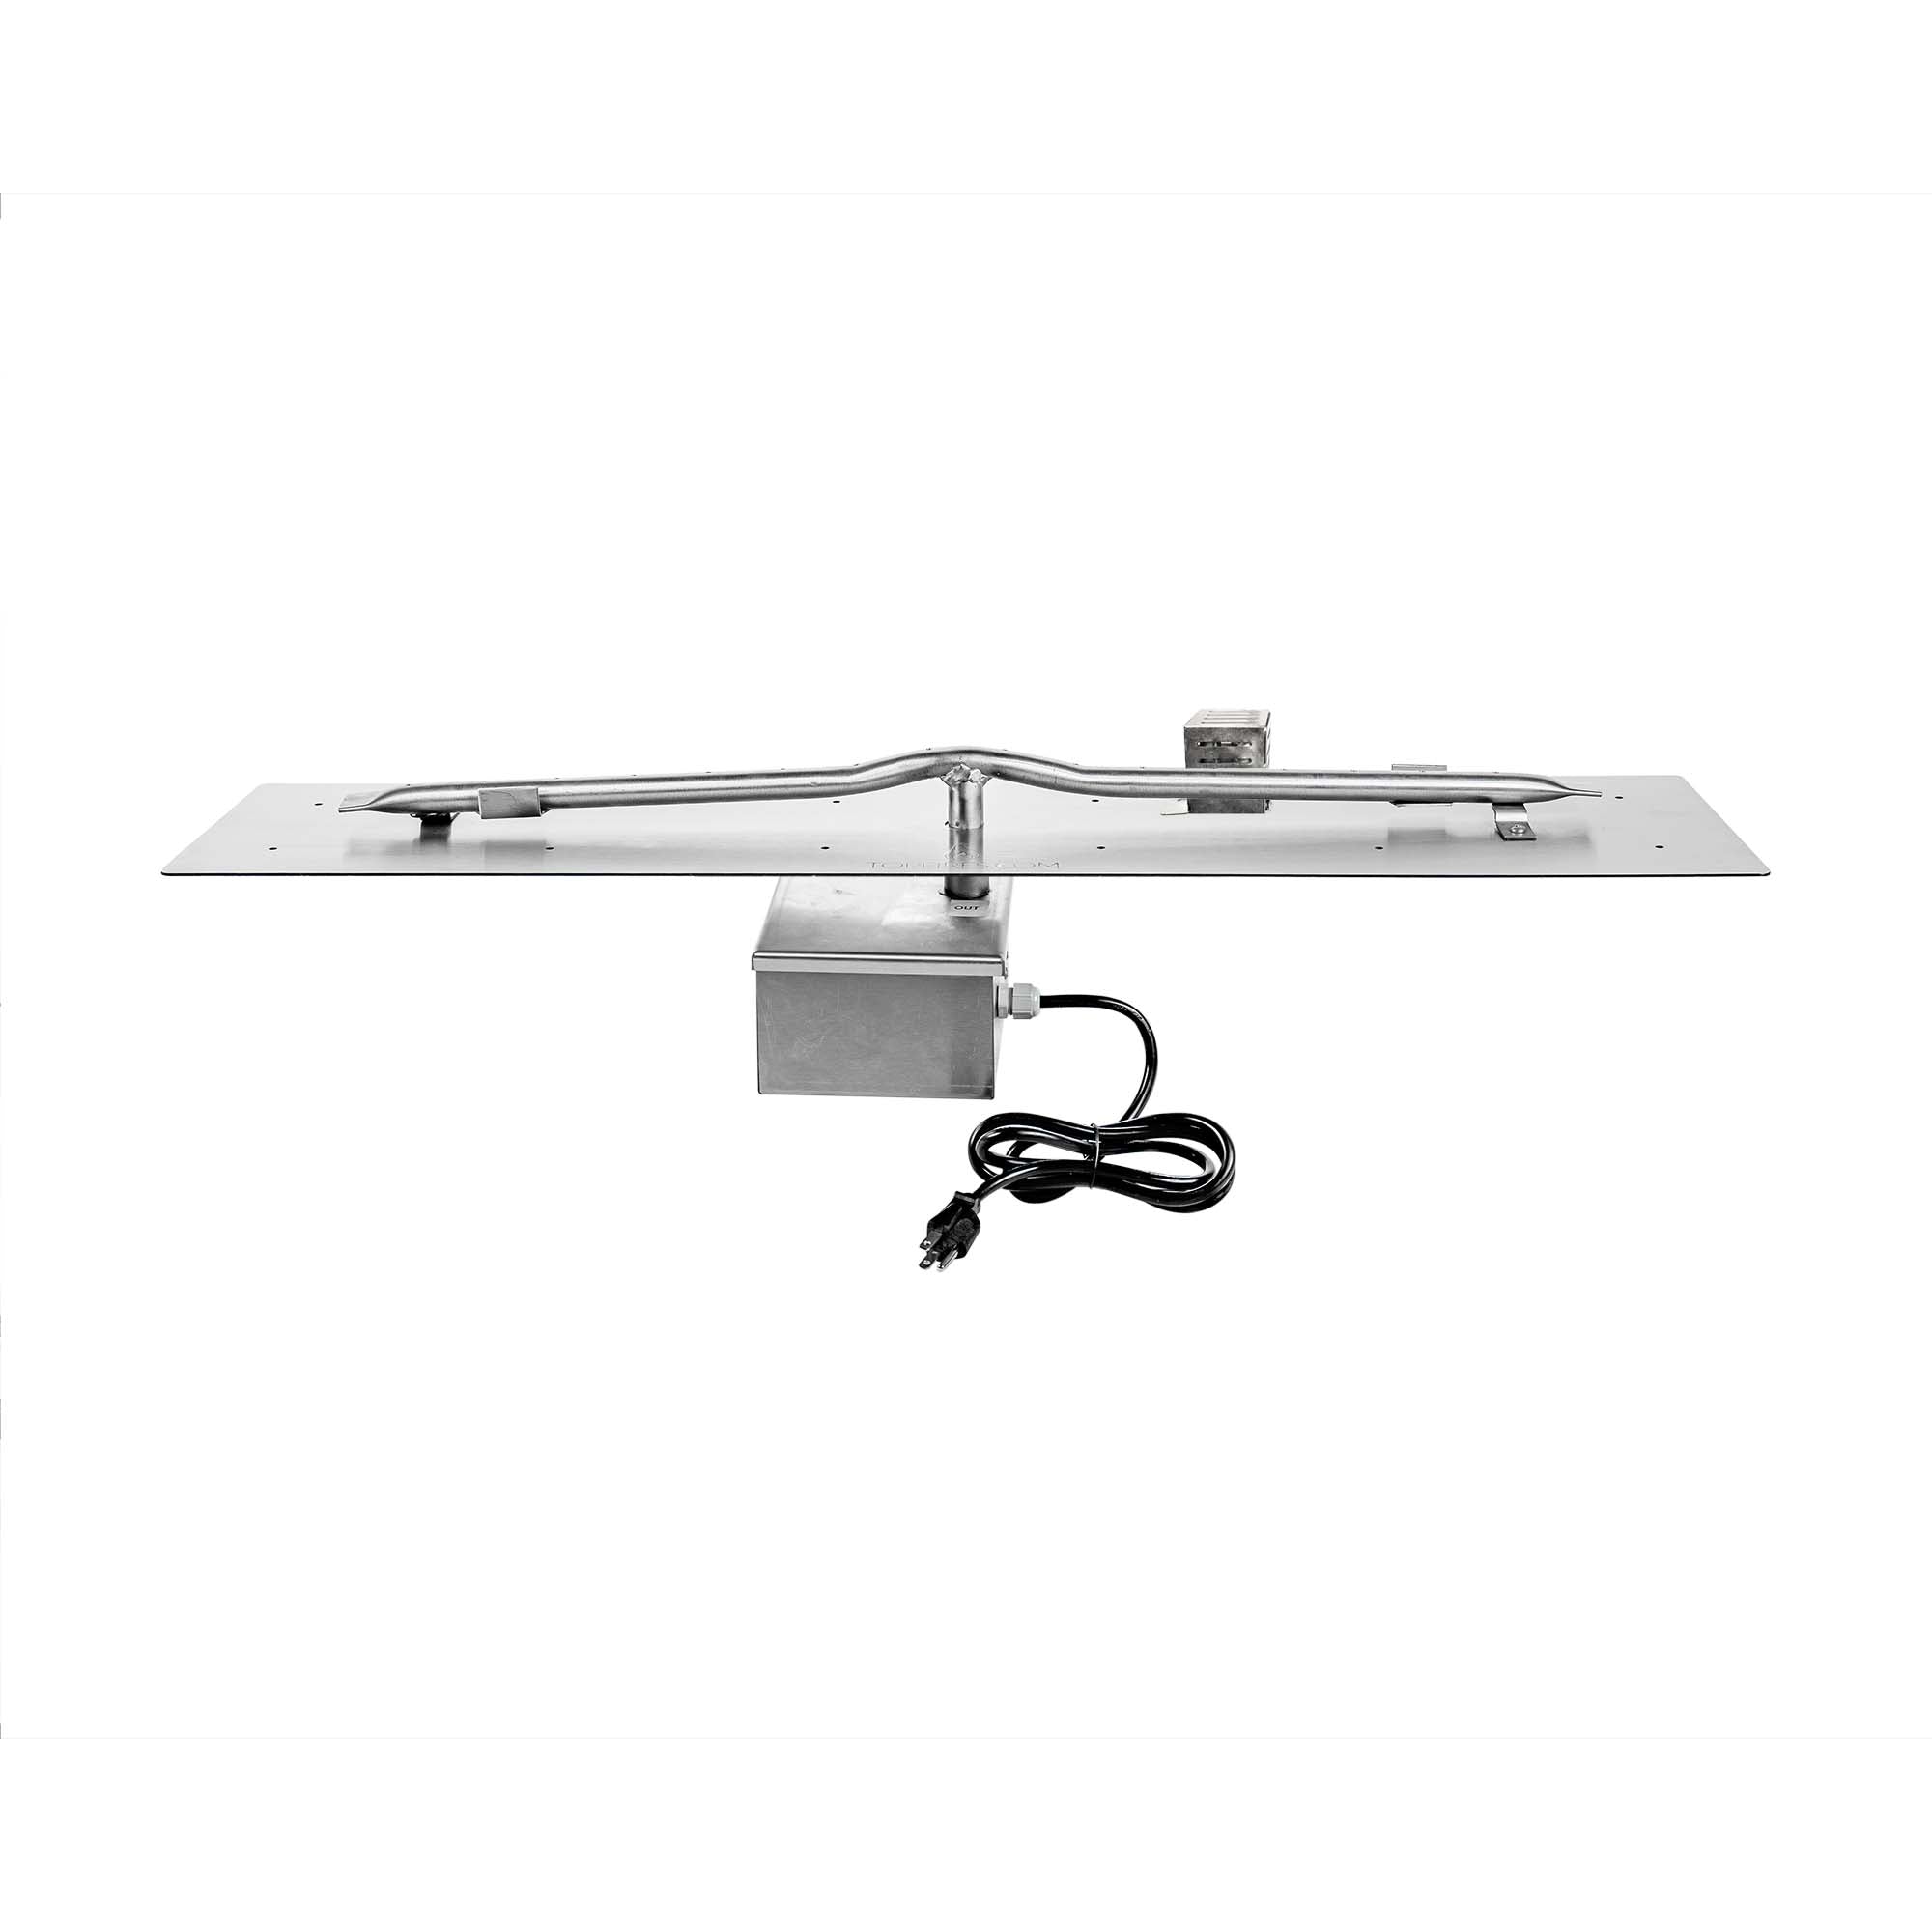 The Outdoor Plus Rectangular Flat Pan 8" with Stainless Steel Linear Burner